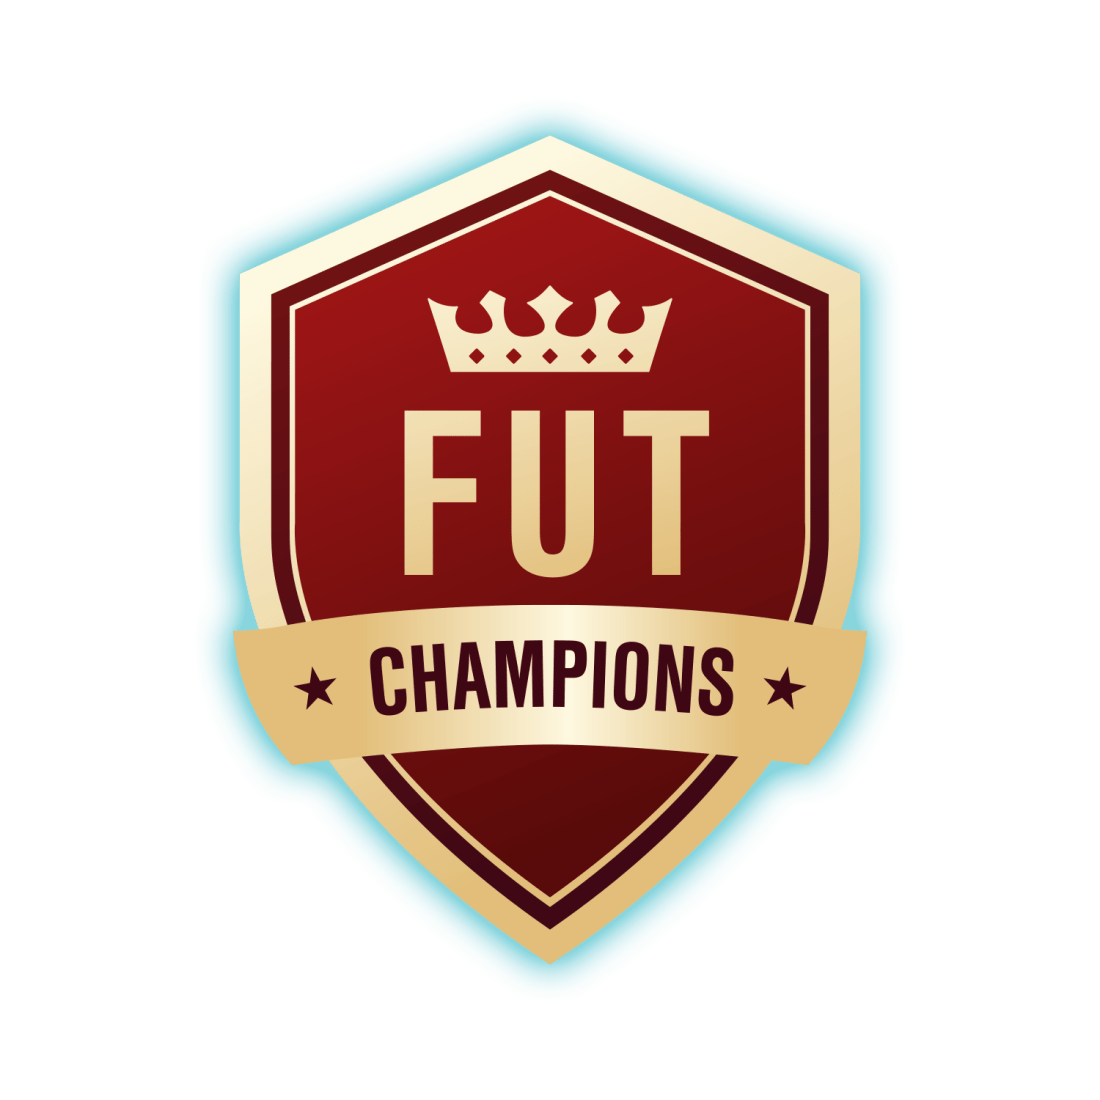 FIFA 23 FUT Champions rewards: How to qualify, playoffs, finals, and more